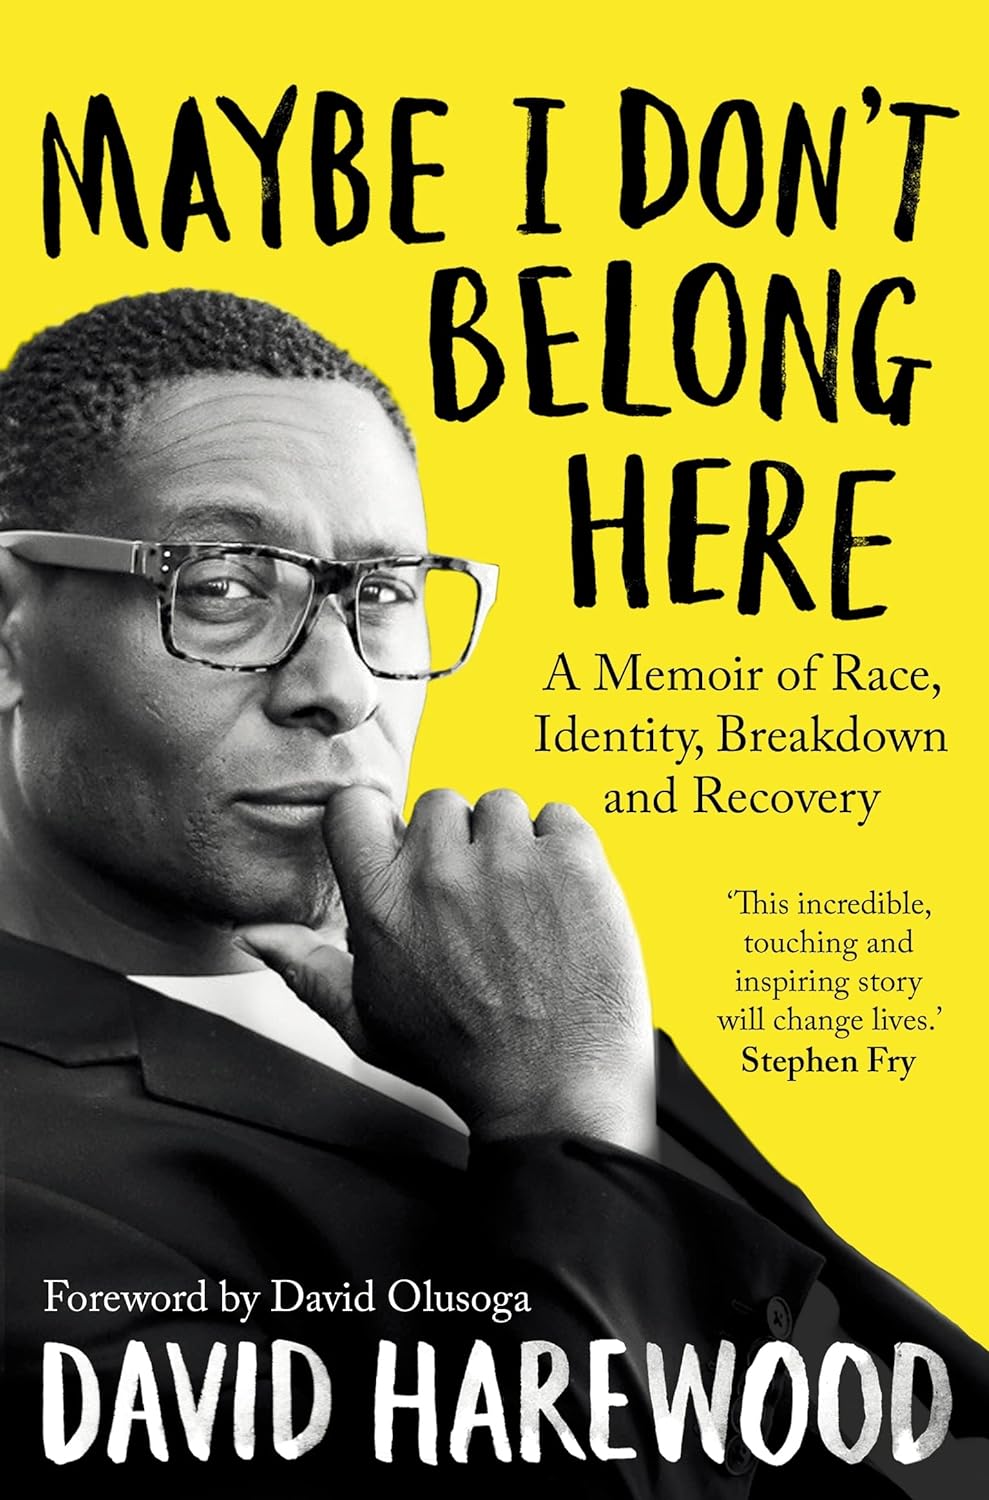 Harewood, David - Maybe I Don't Belong Here: A Memoir of Race, Identity, Breakdown and Recovery